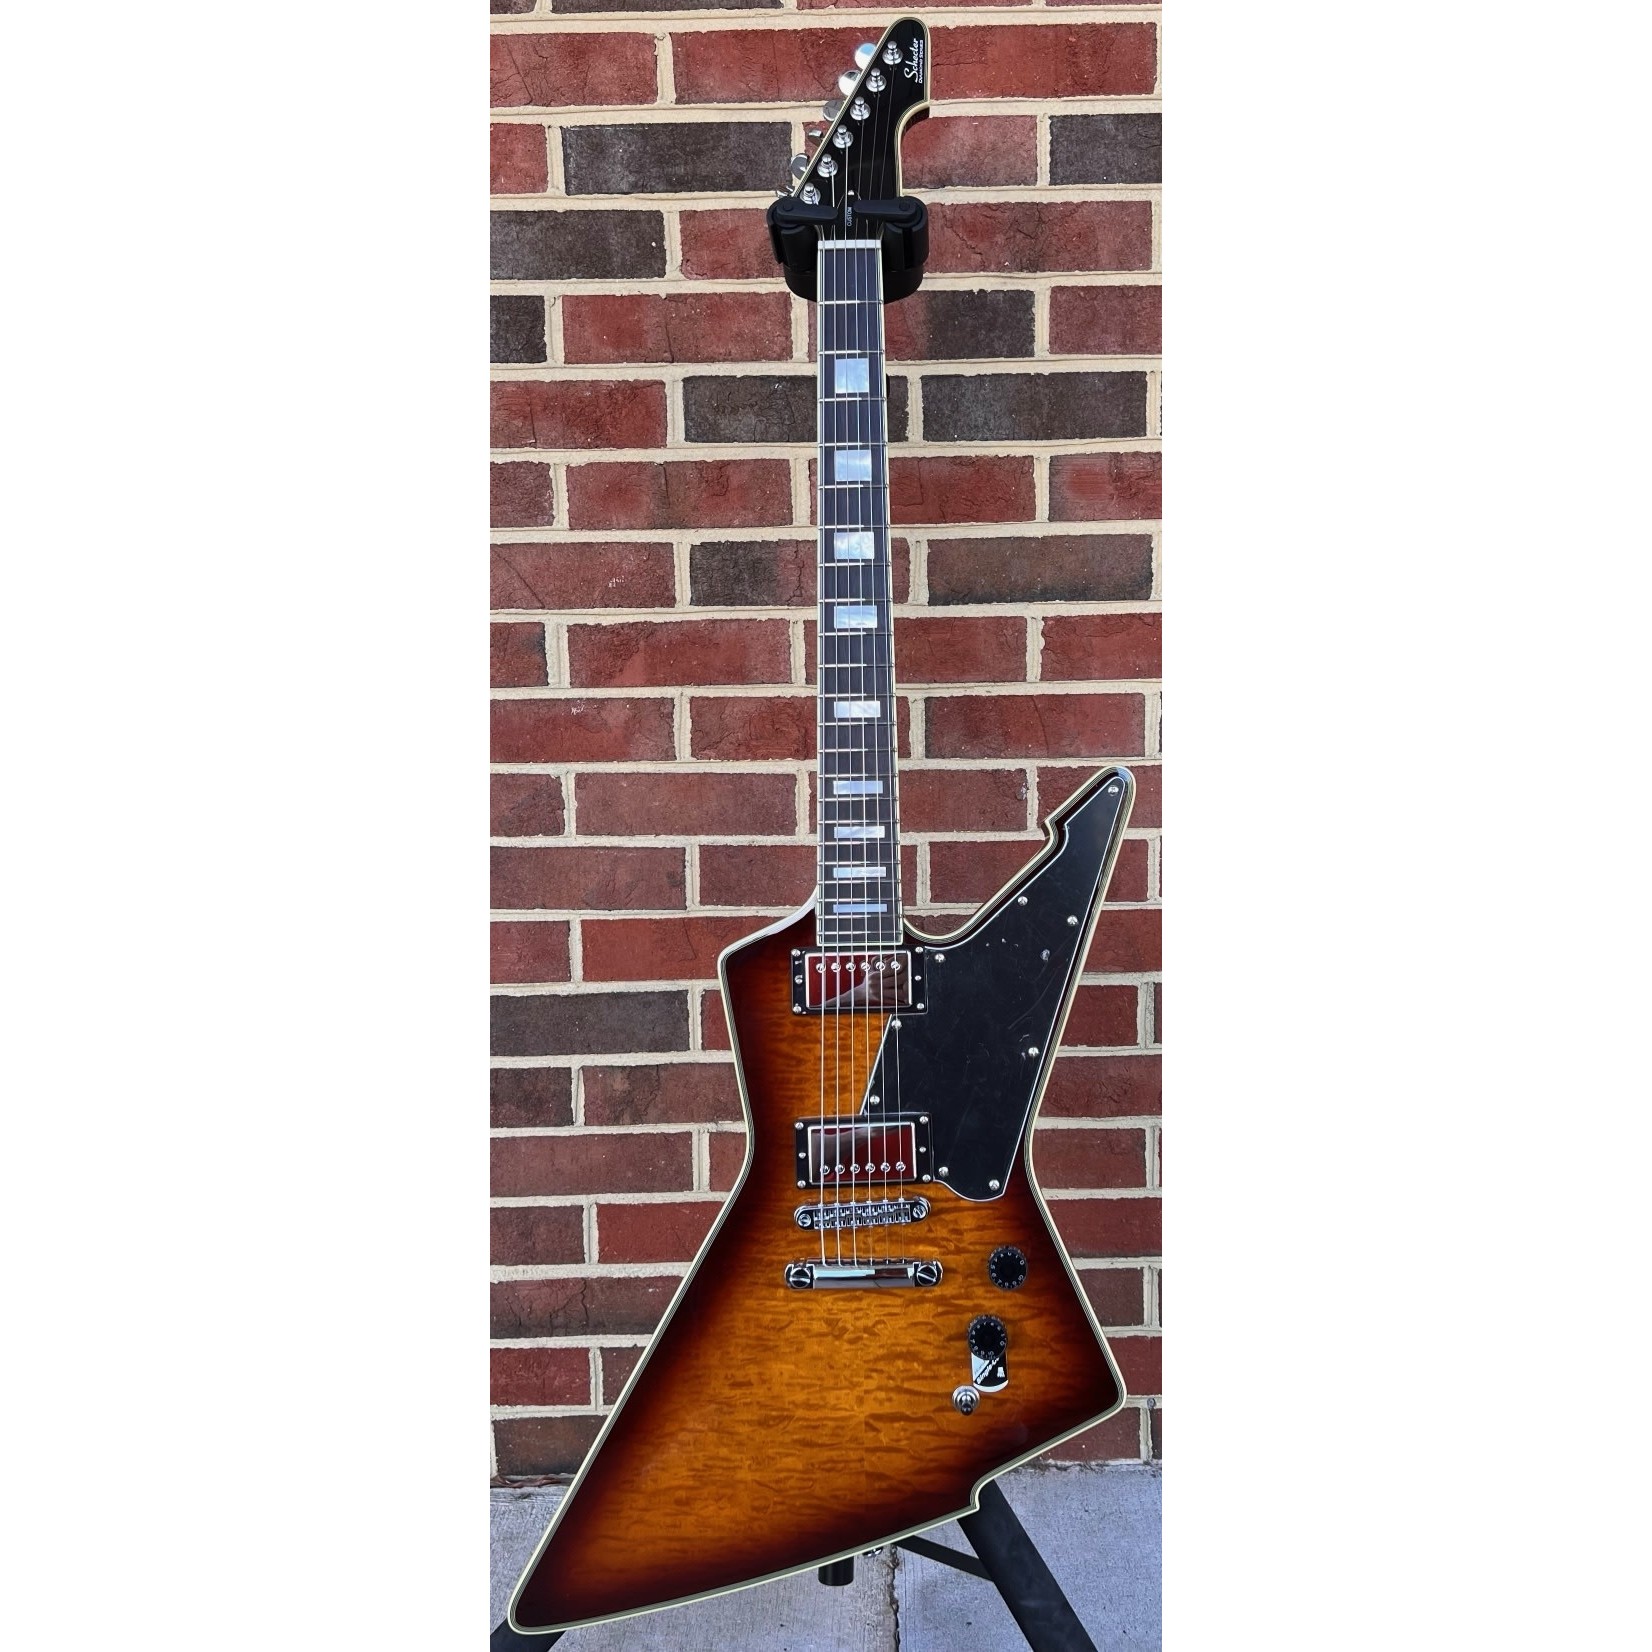 Schecter Guitar Research Schecter E-1 Custom, Vintage Sunburst, Quilted Maple Top, Ebony Fretboard, Locking Tuners, Schecter USA Sunset Strip/Pasadena Pickups, SN# W21113059